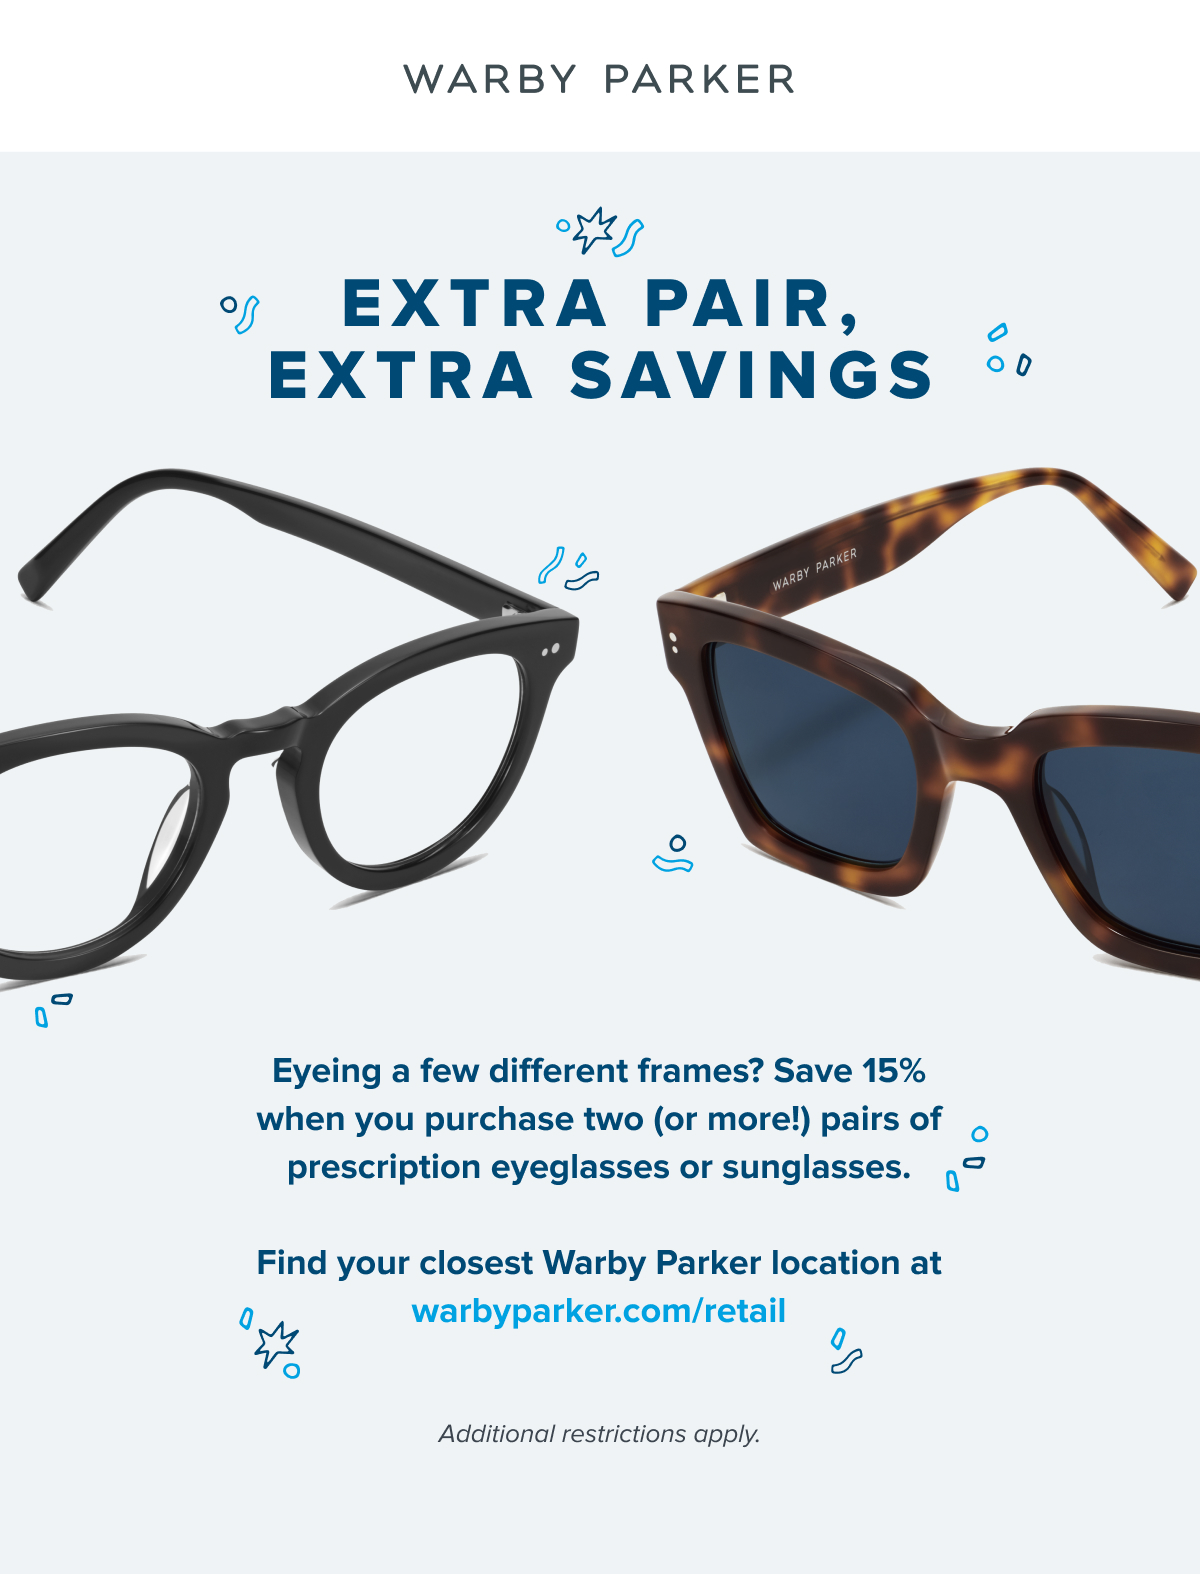 Add a pair and save from Warby Parker